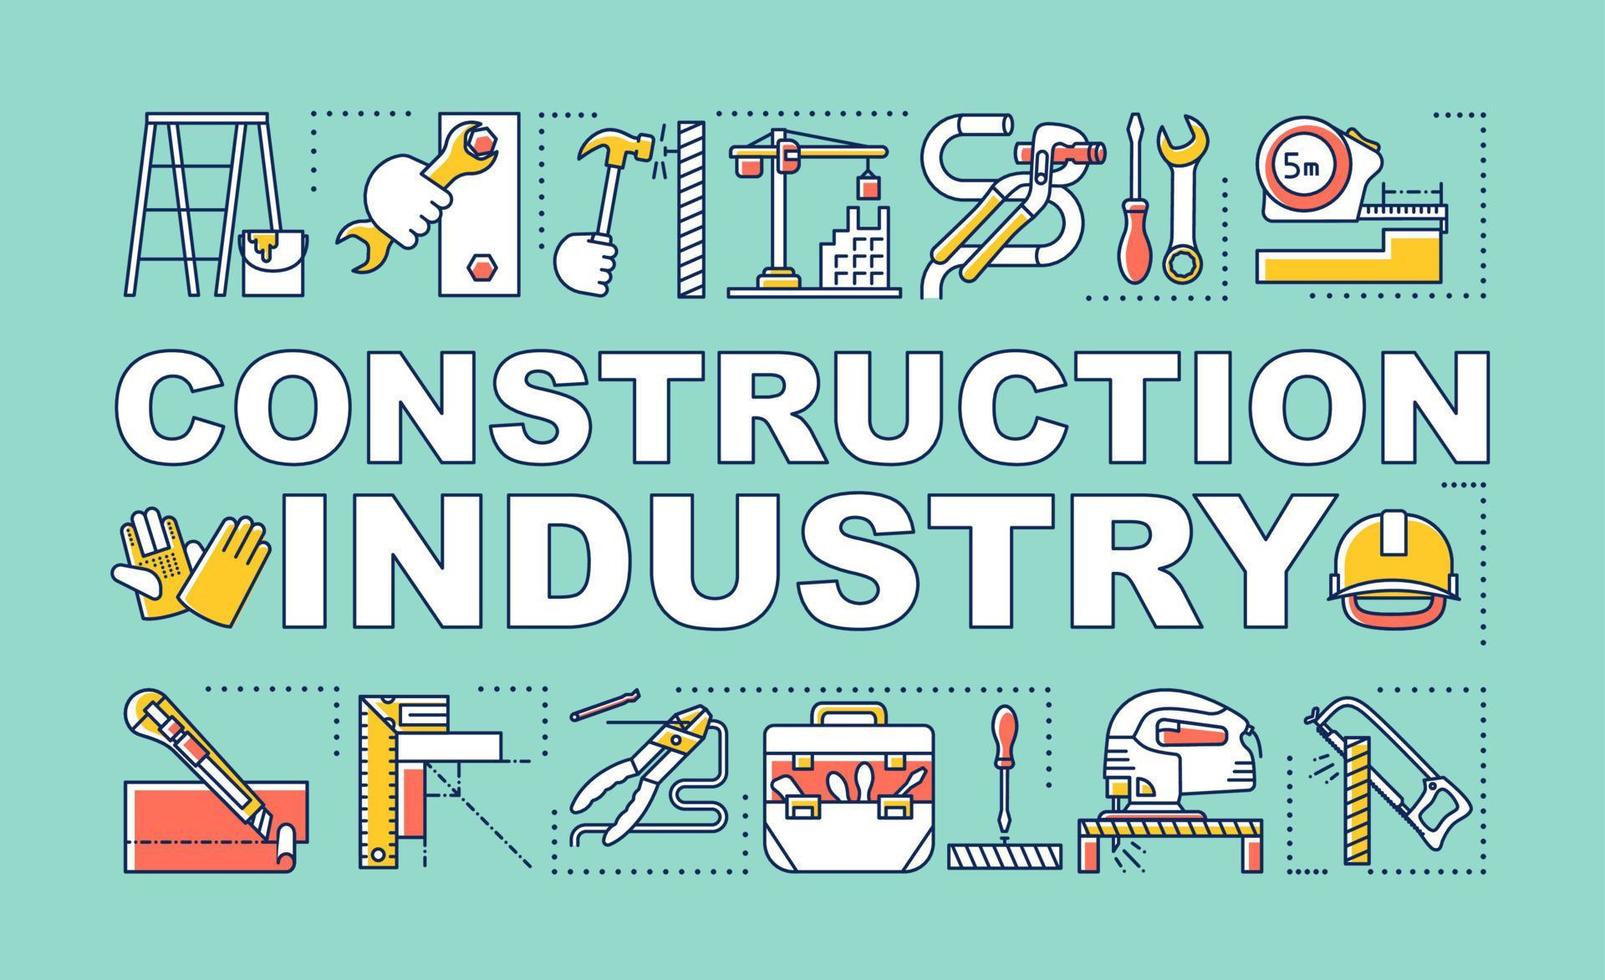 Construction industry word concepts banner. Repair and renovation of housing. Building yard. Presentation, website. Isolated lettering typography idea with linear icons. Vector outline illustration